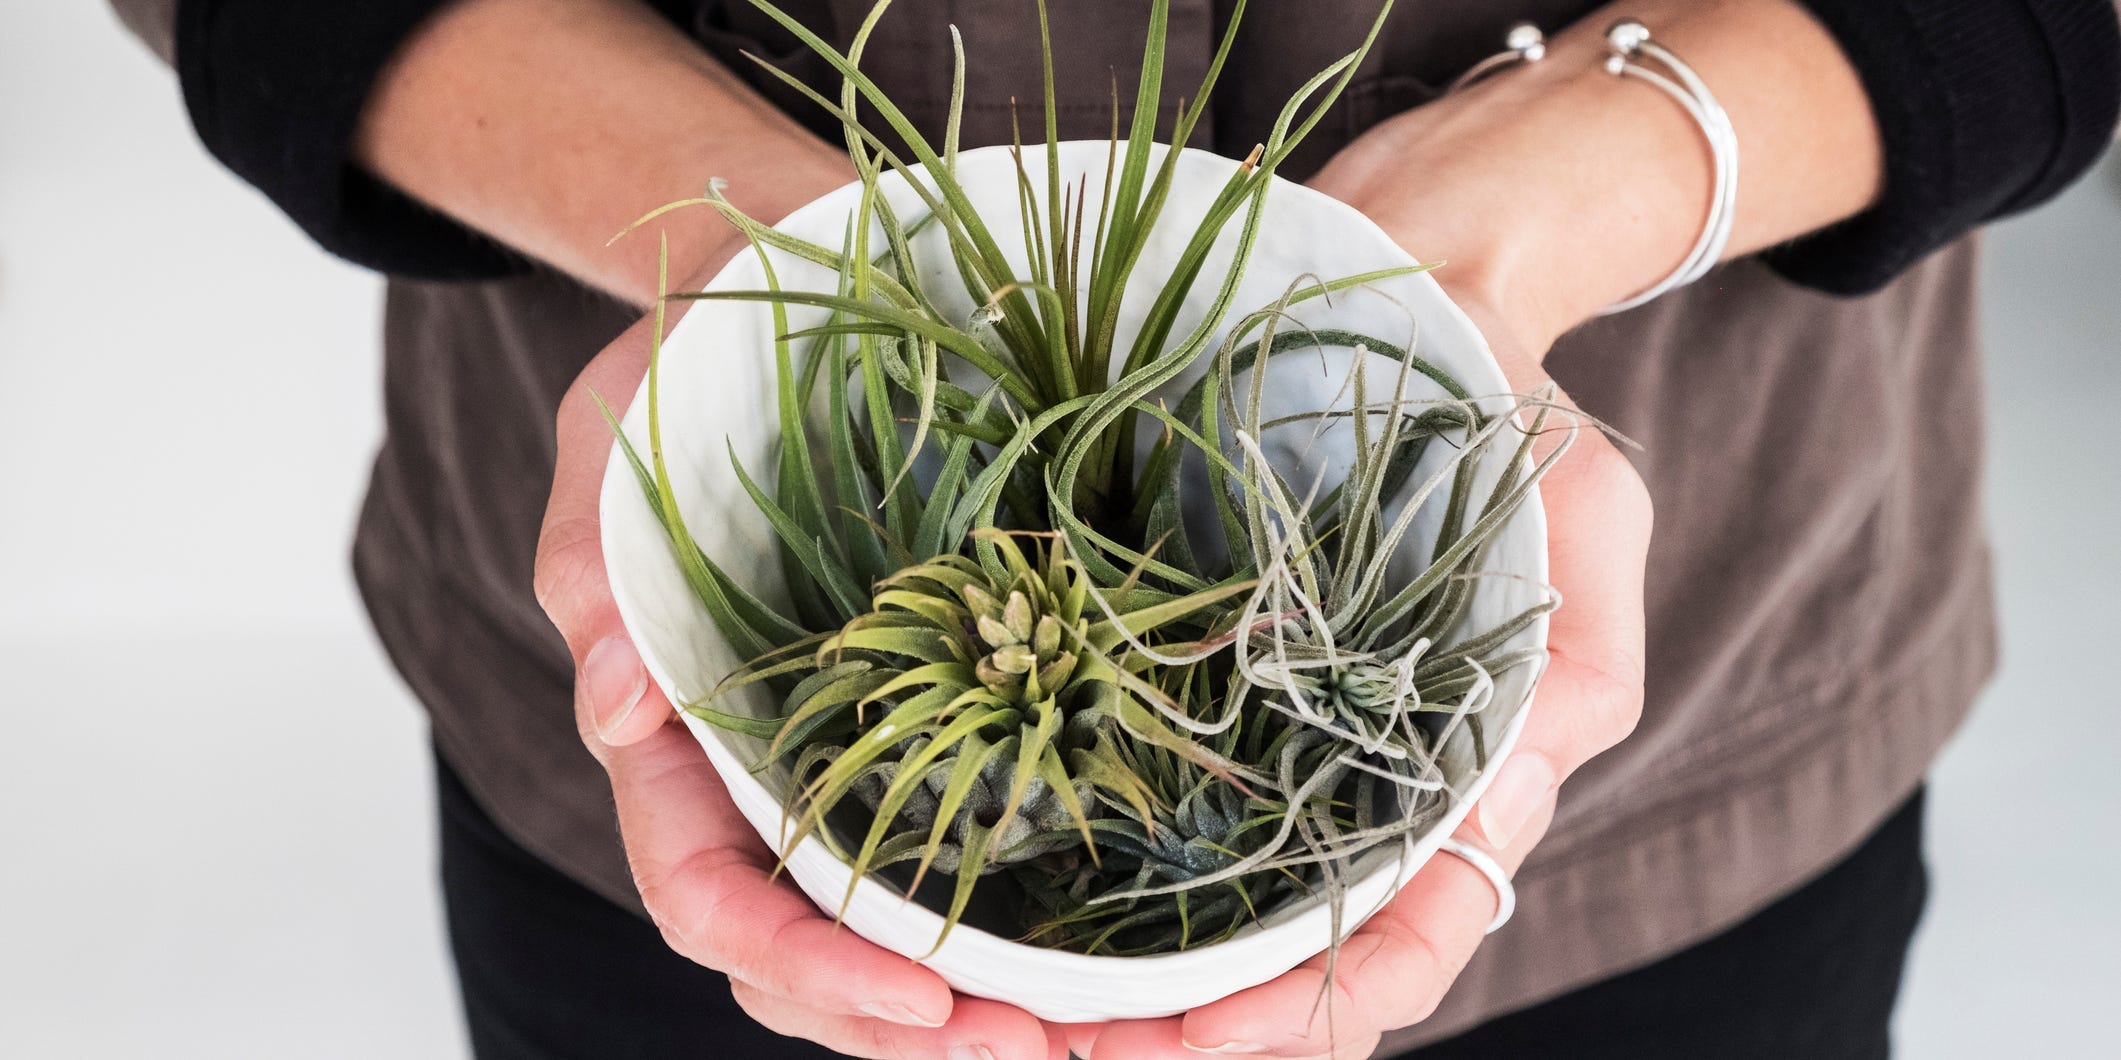 Hands holding a bowlful of air plants